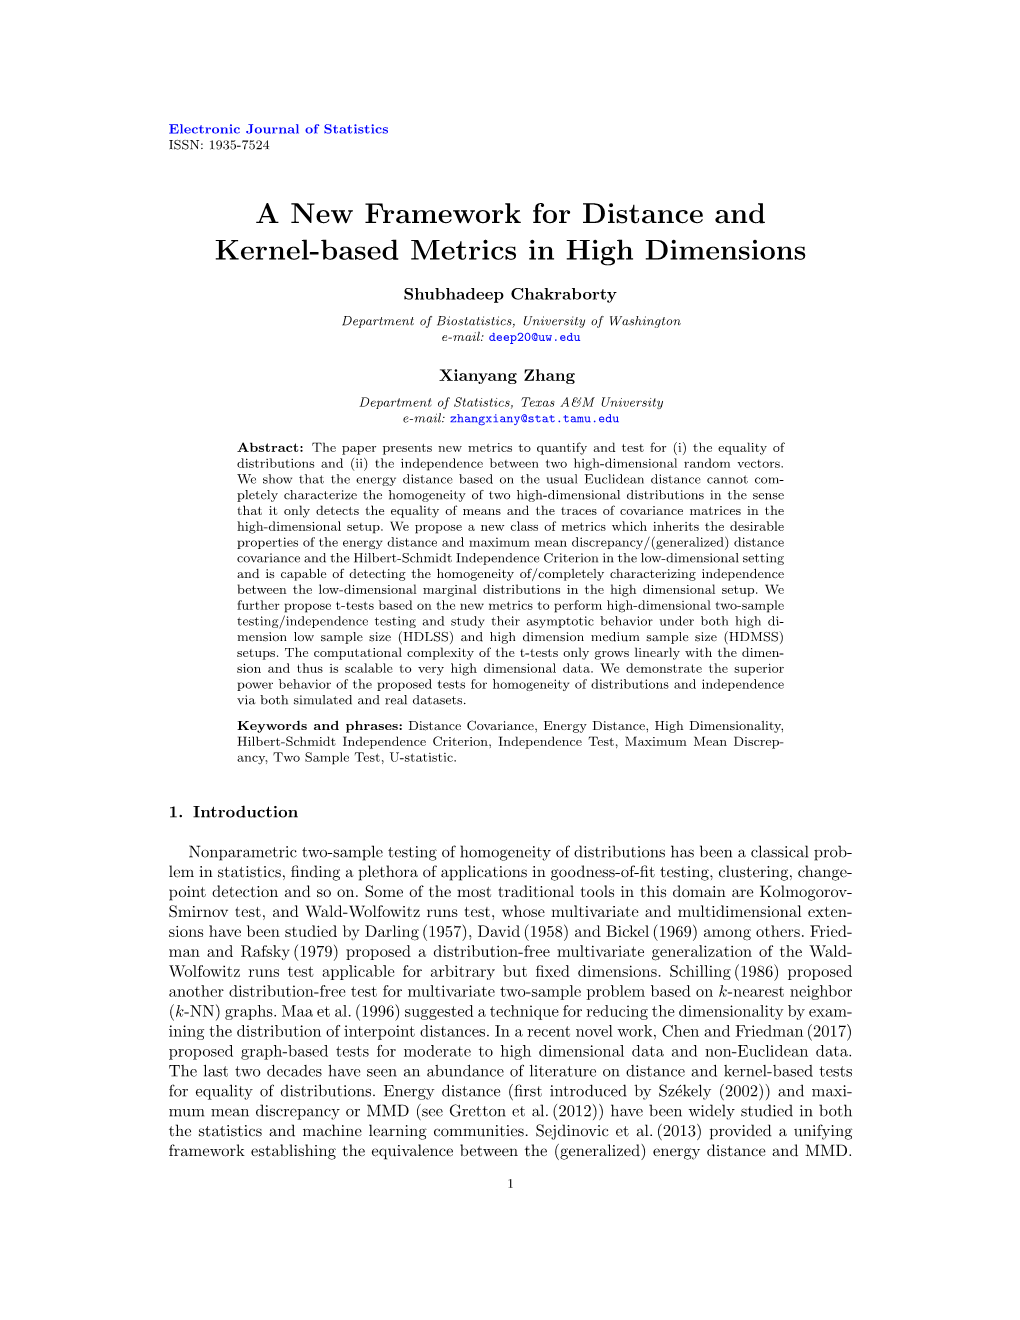 A New Framework for Distance and Kernel-Based Metrics in High Dimensions